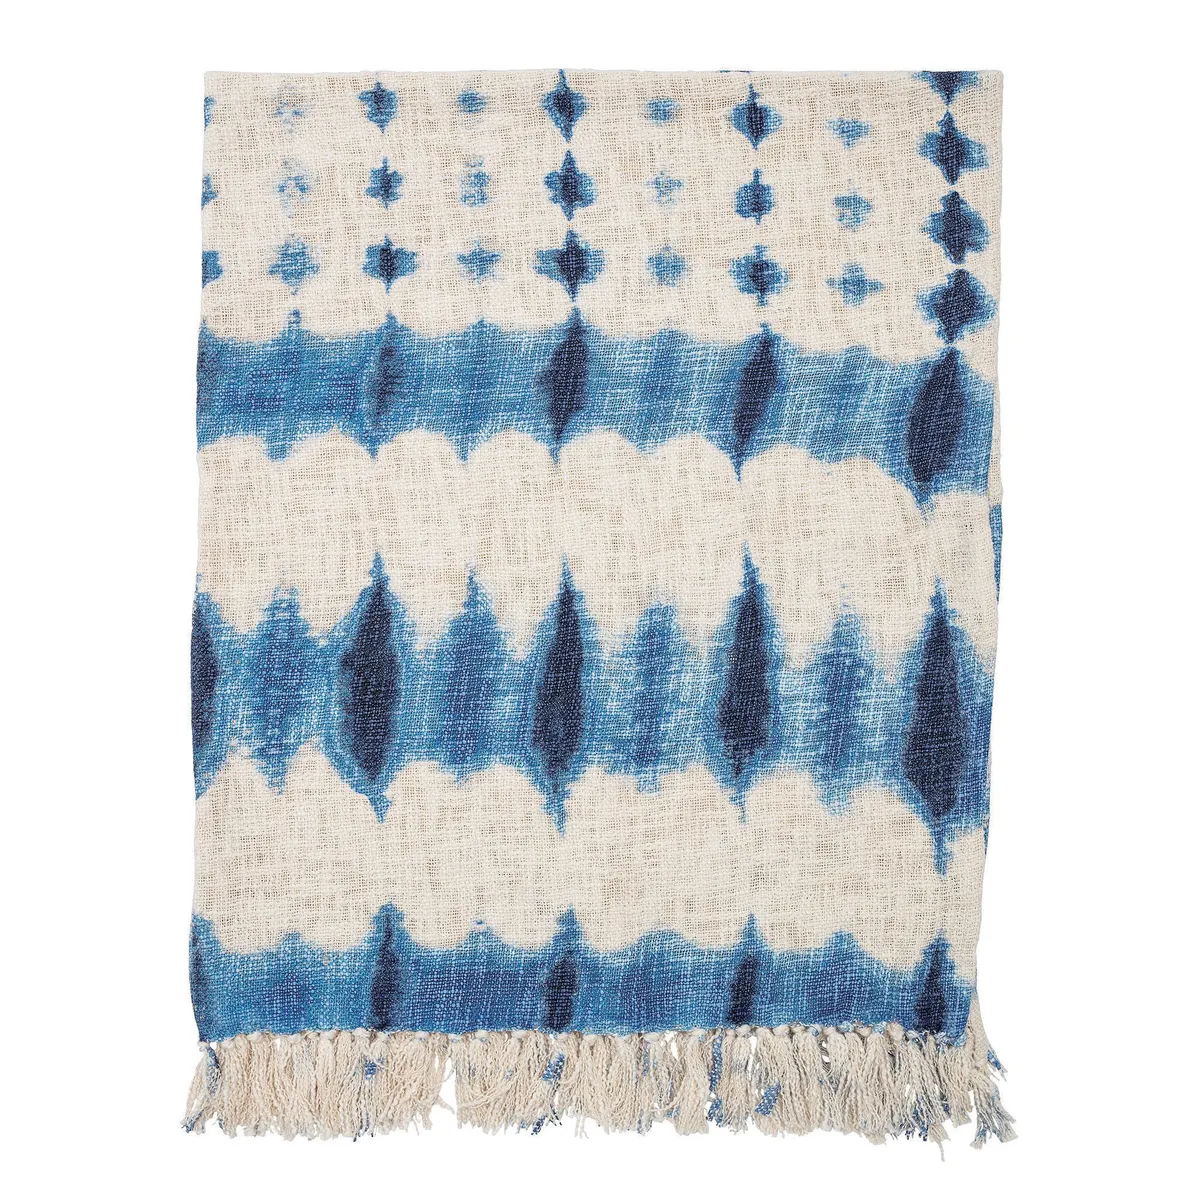 Printed tie-dye cotton throw in Blue, £65, Cult Furniture